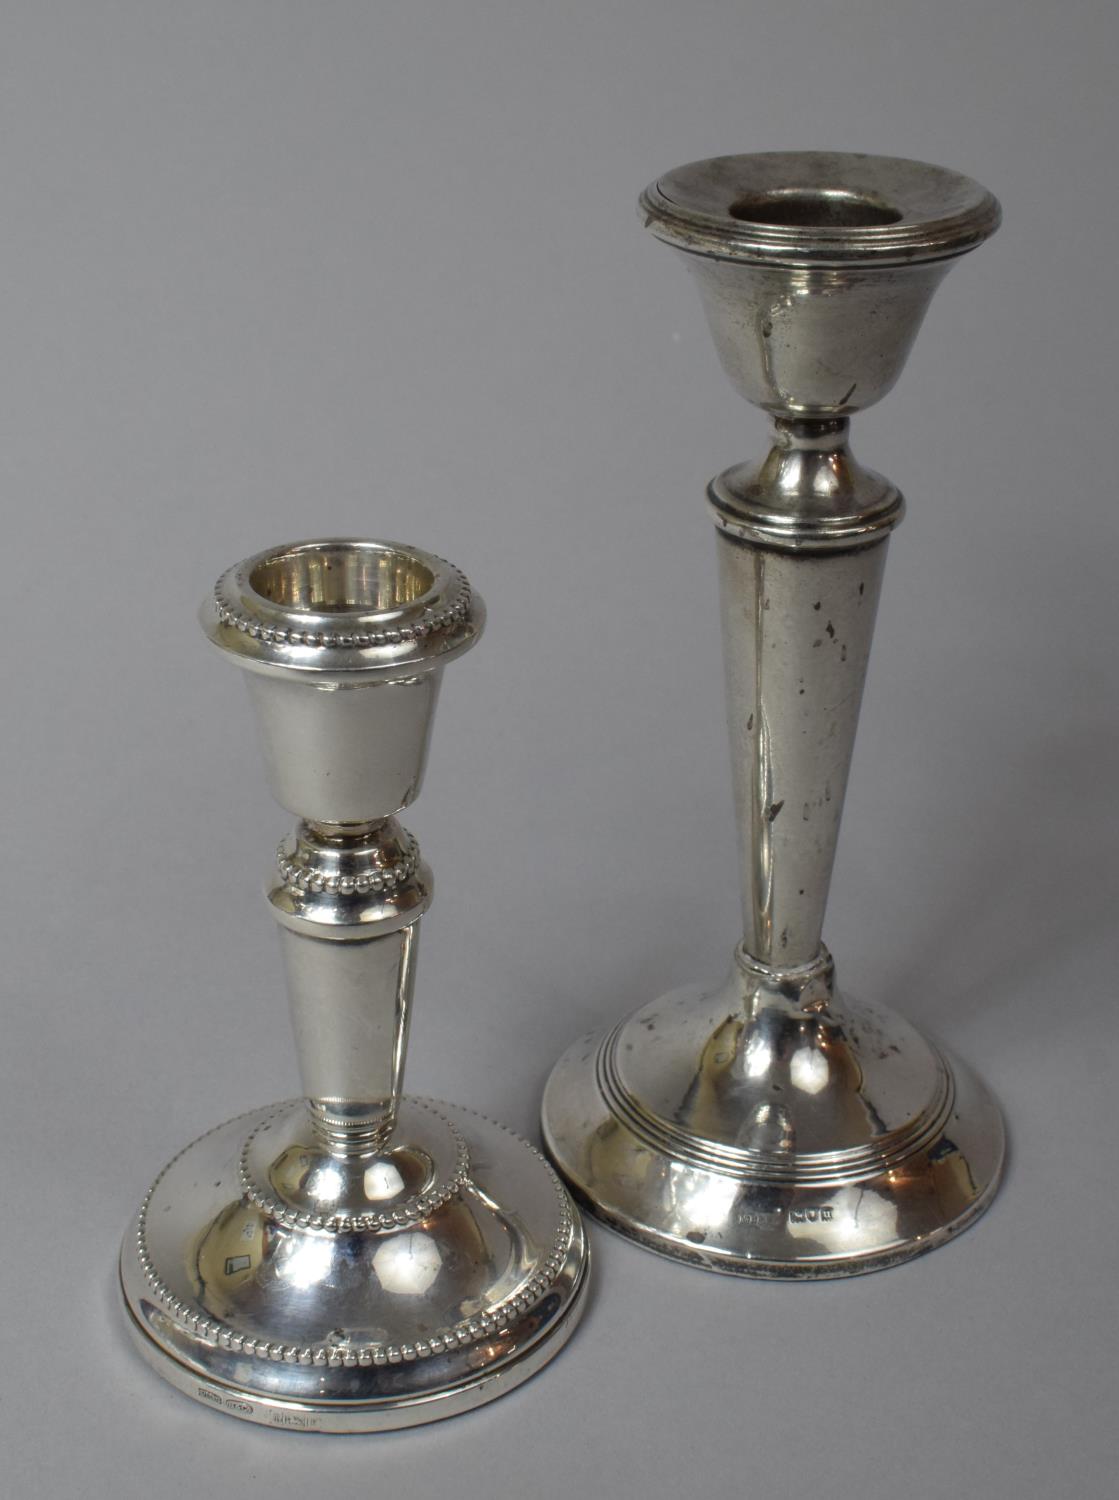 Two Filled Silver Candlesticks, Birmingham 1984, 11cm high and London 1915, 15cm high, has Been - Image 2 of 5